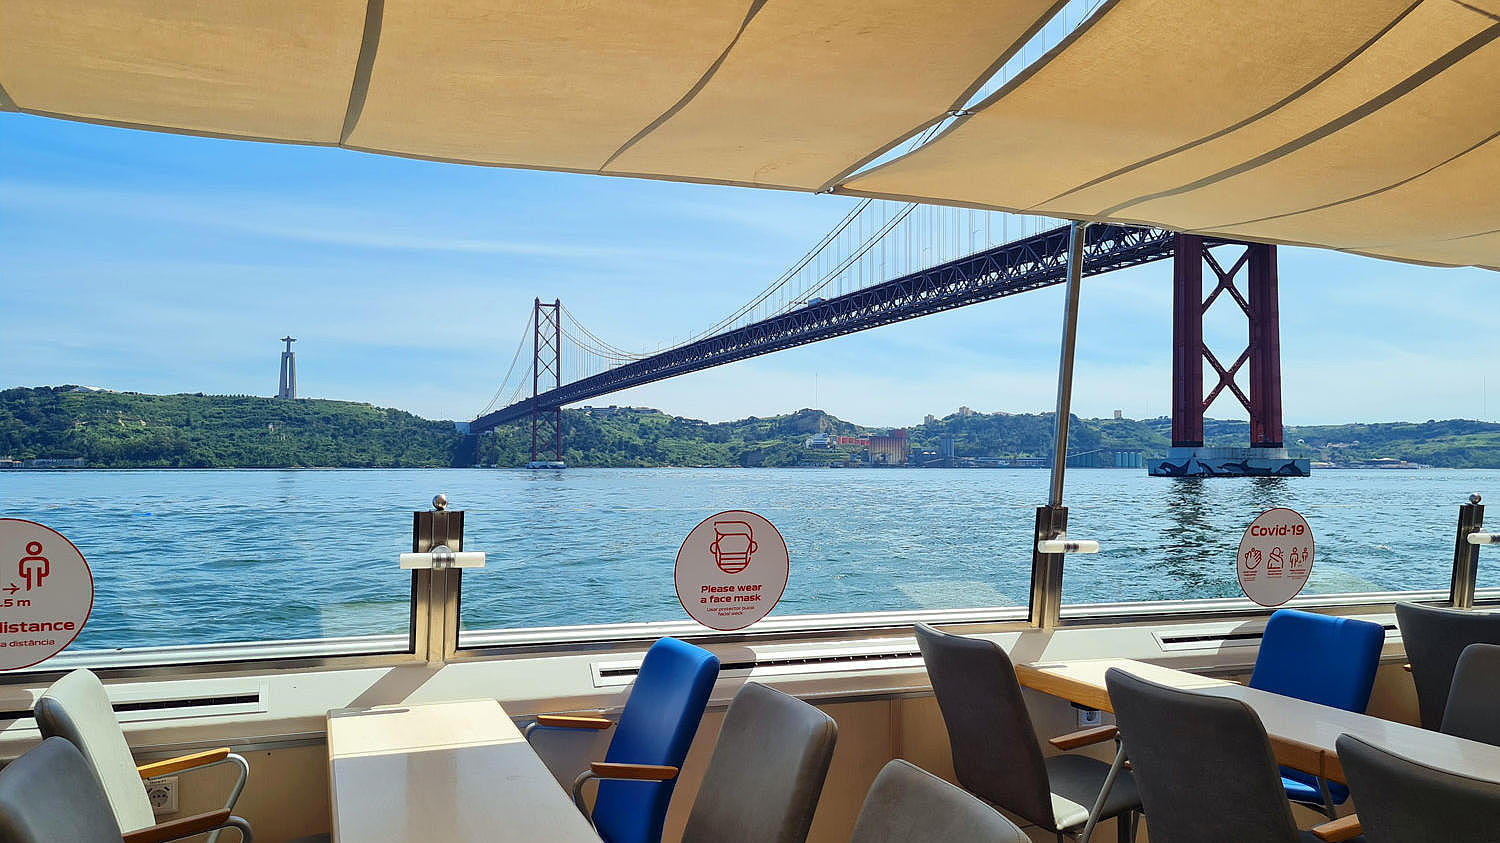 View from the vessel on the Tagus River, the bridge Ponte 25 de Abril as well as the statue of Cristo Rei.